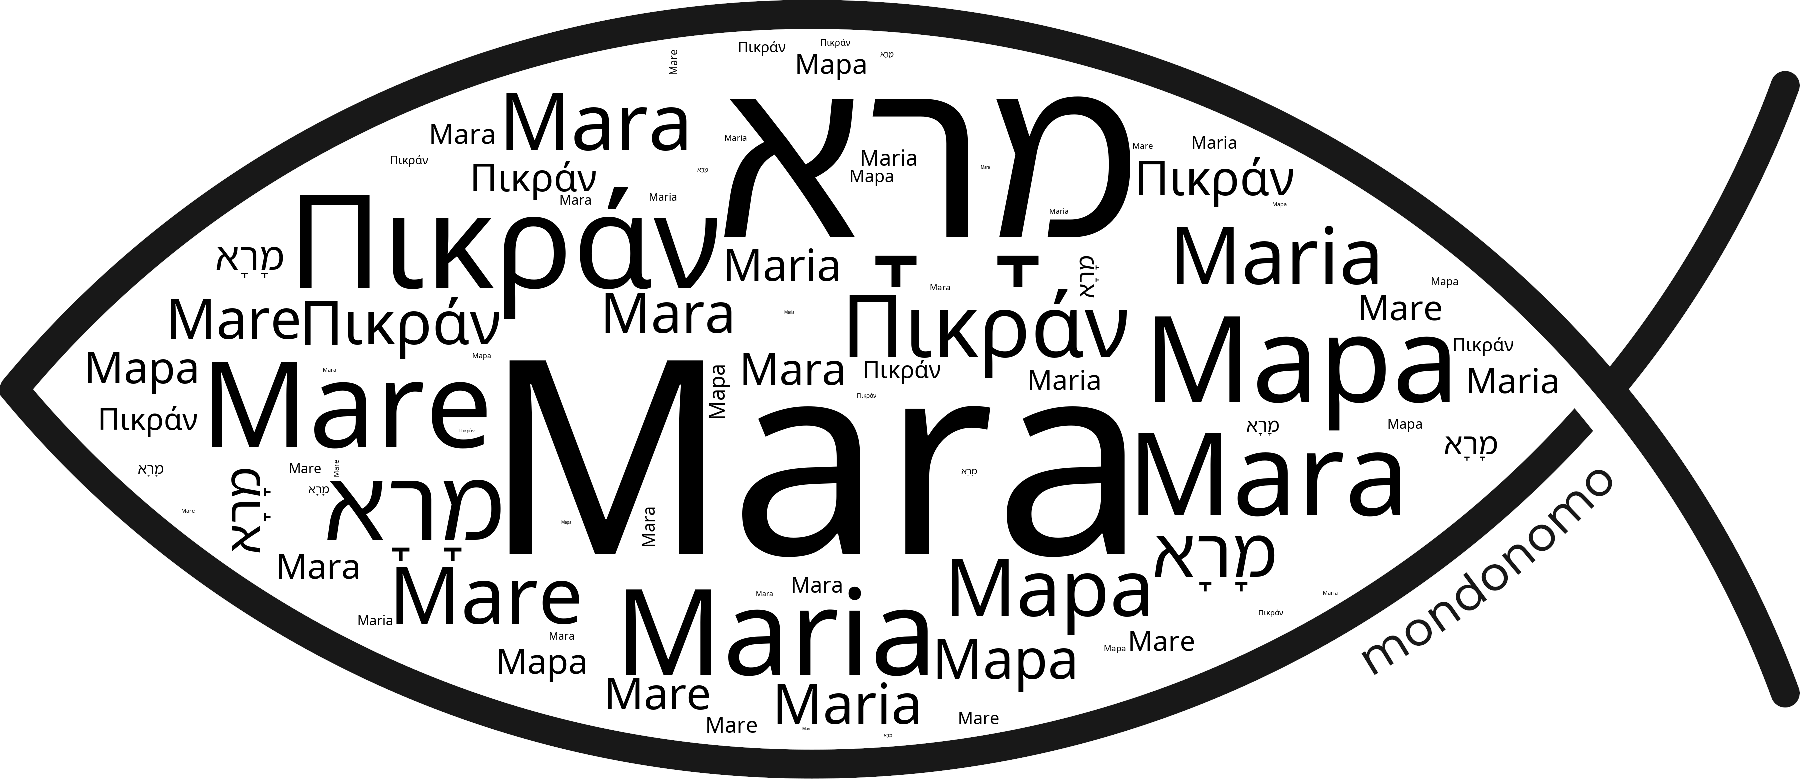 Name Mara in the world's Bibles